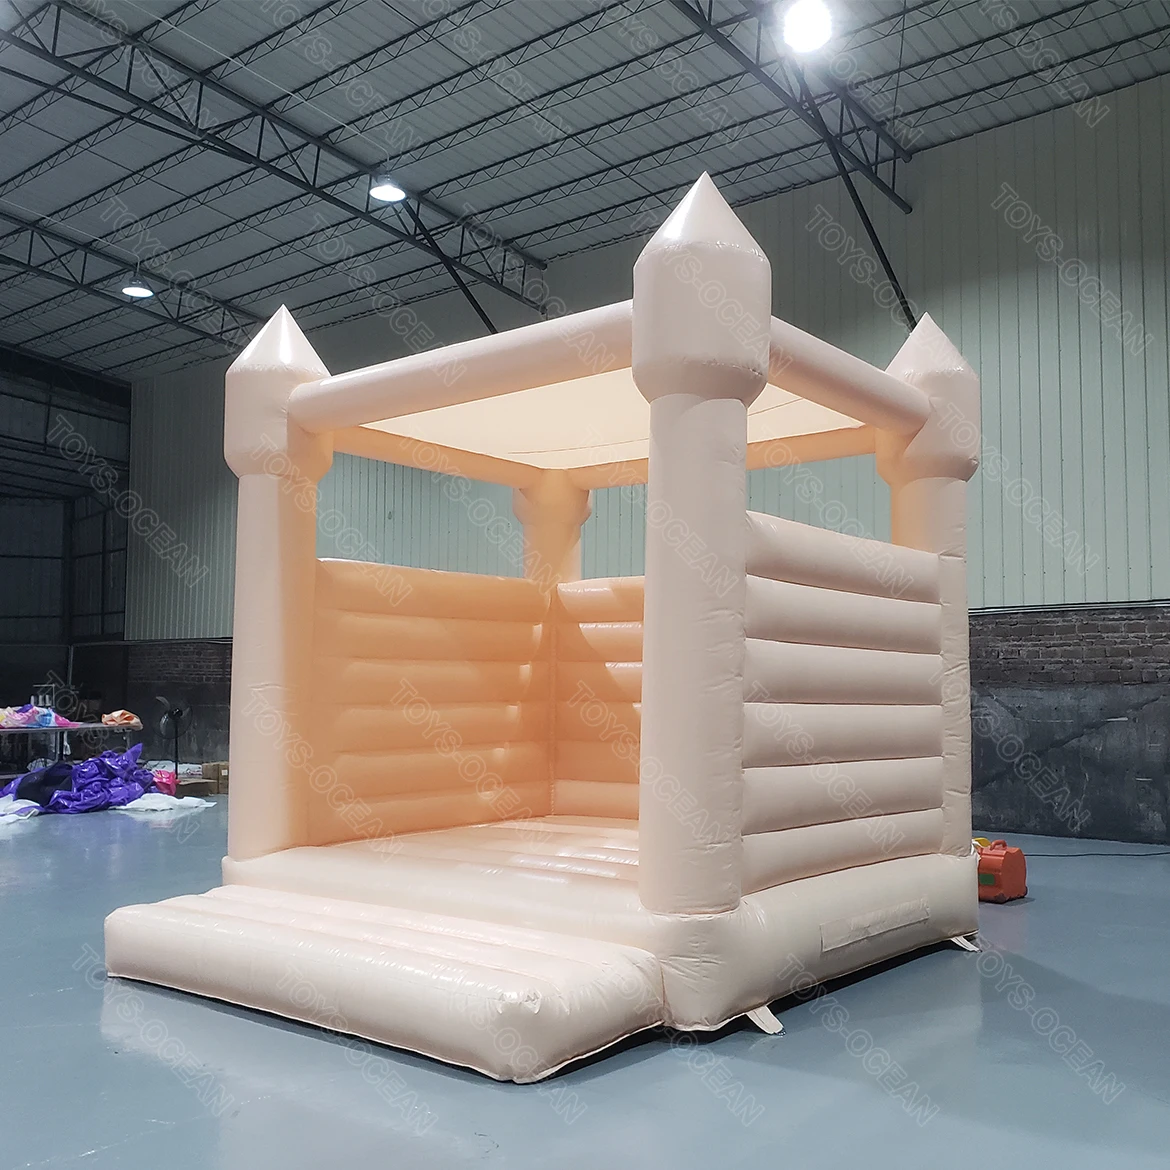 

Commercial 4x4m adult White Inflatable Wedding Bouncer Jumper Jump Bouncy Castle Bounce House Combo white bounce house